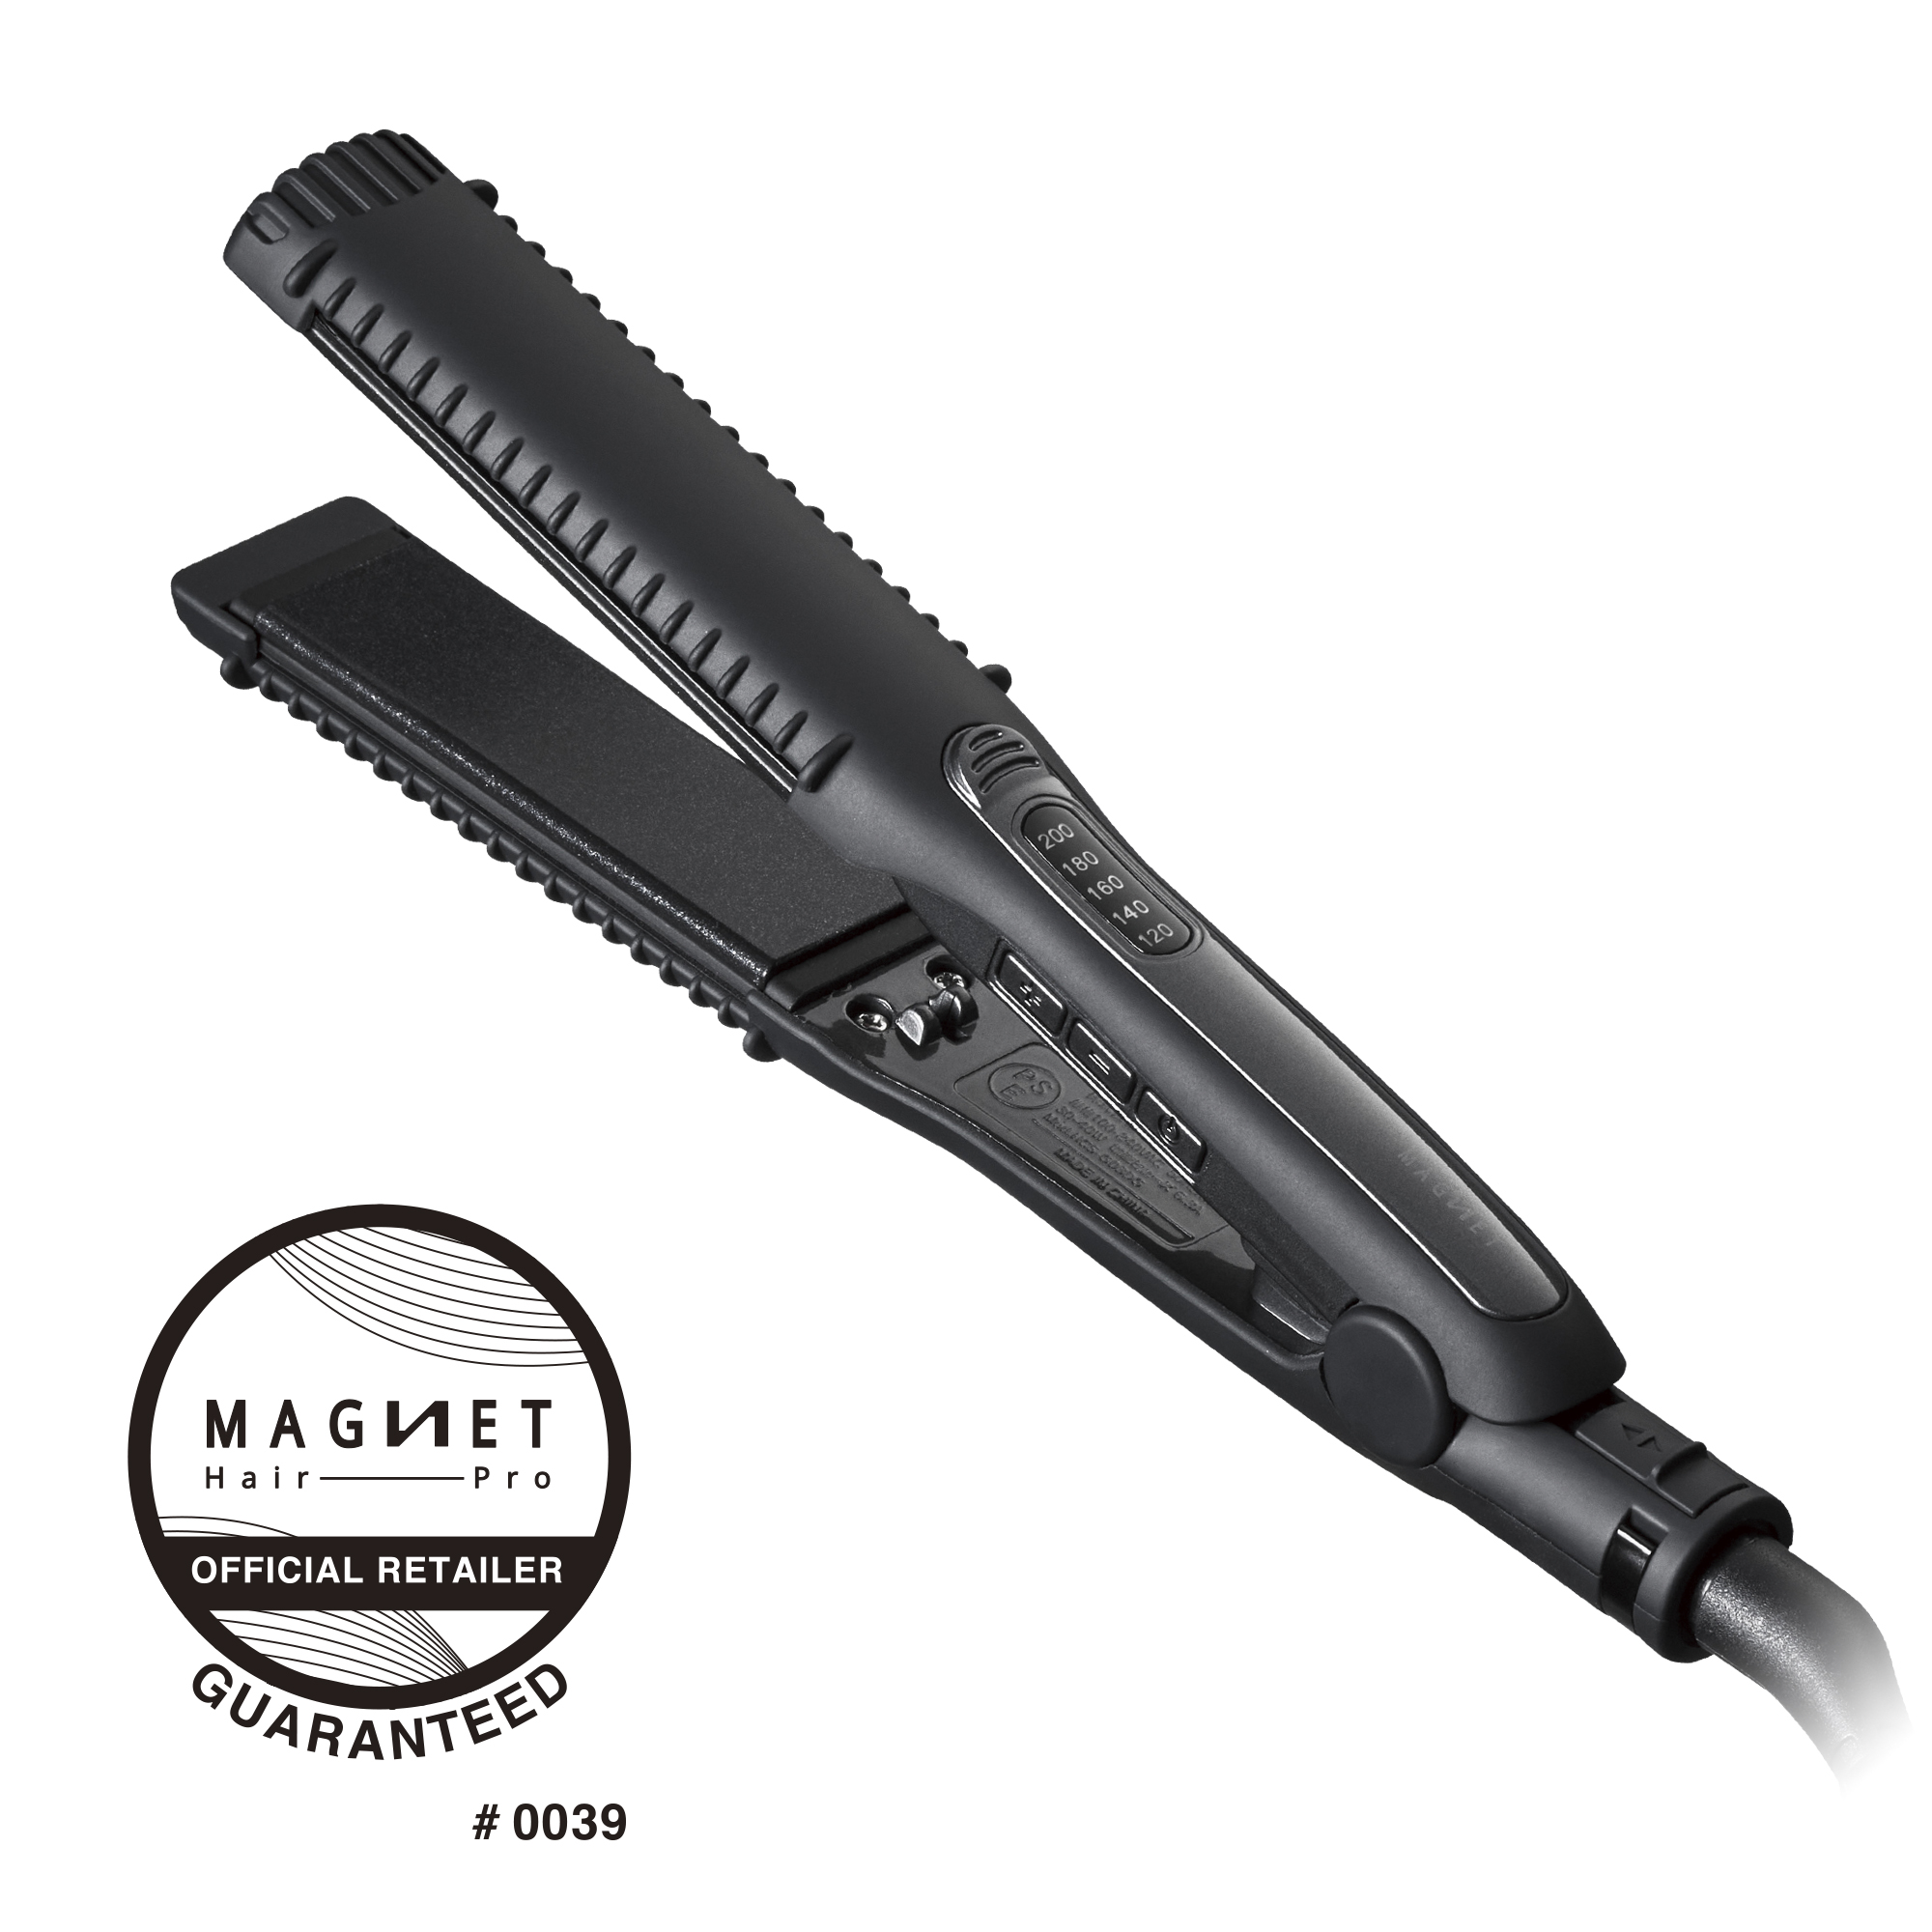 HOLISTIC cures　MAGNETHairPro STRAIGHT IRON